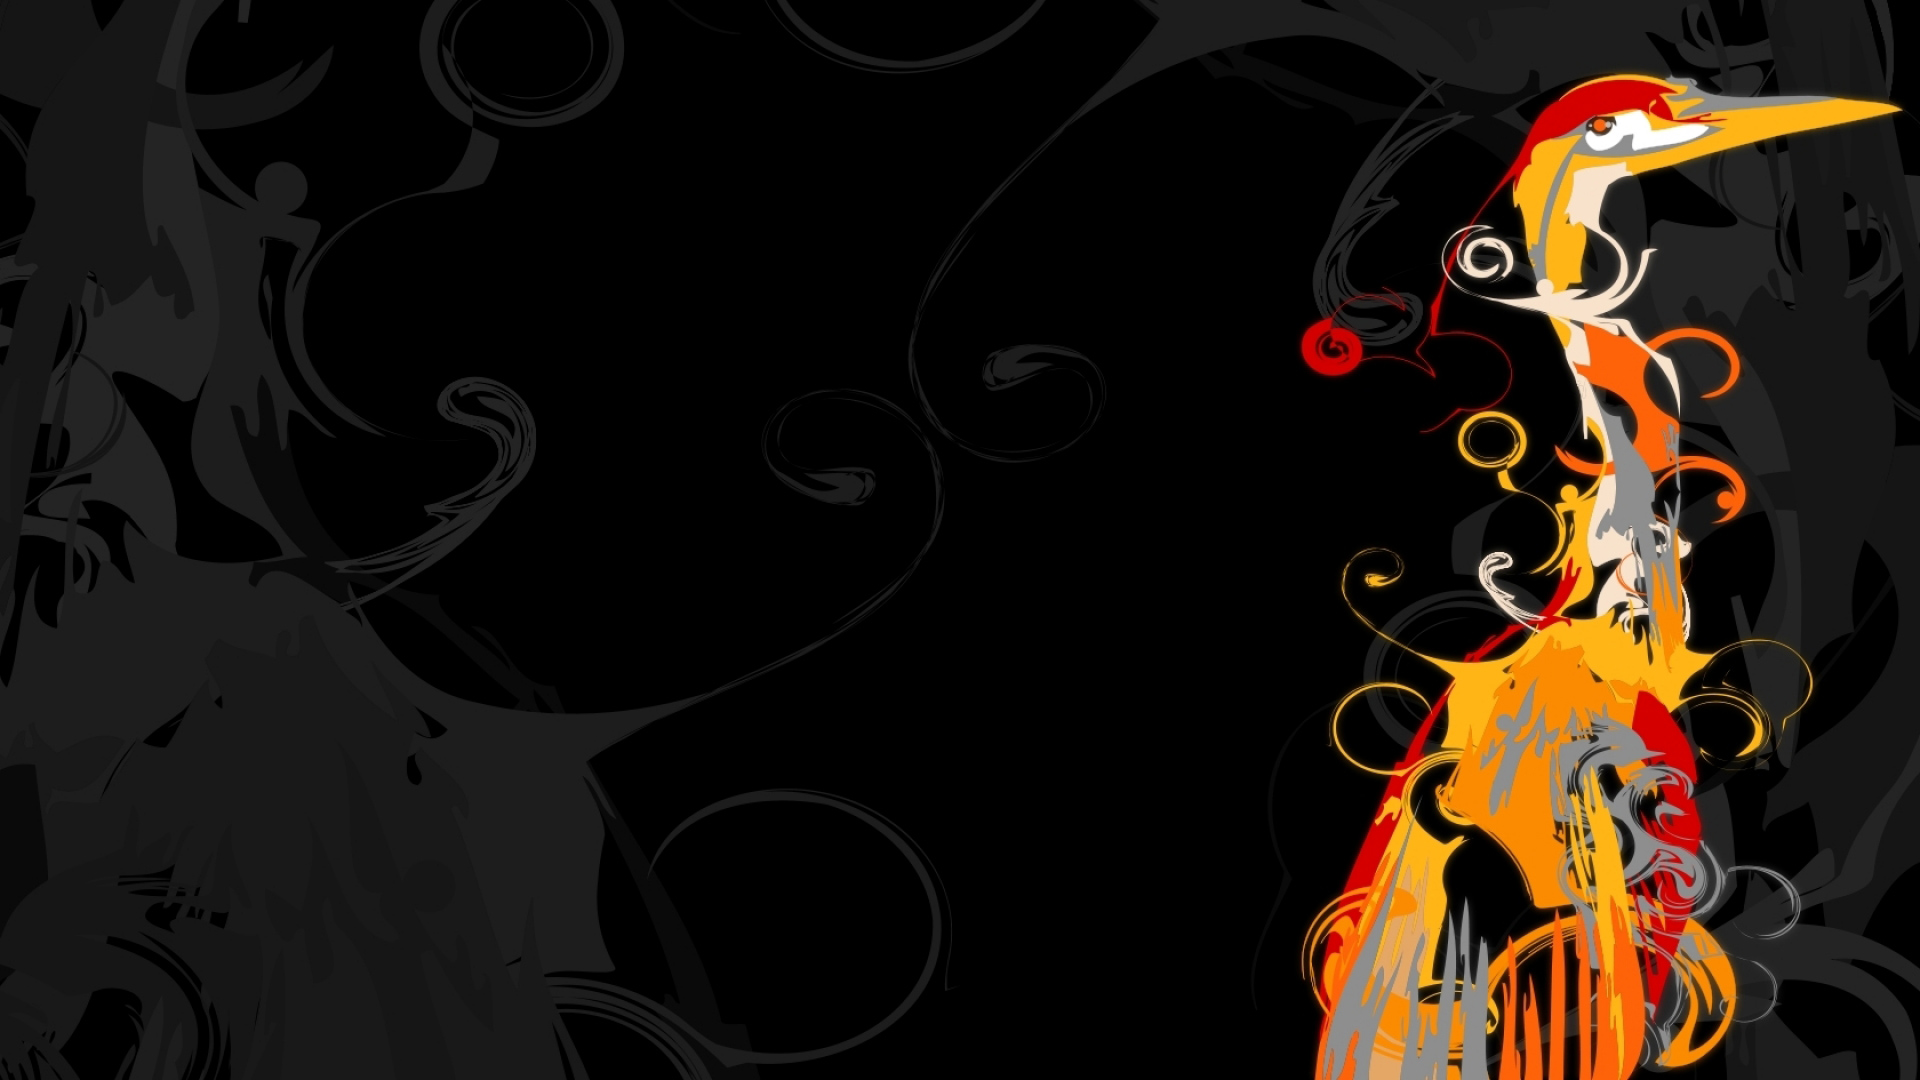 techsource wallpaper,graphic design,illustration,font,animation,flame